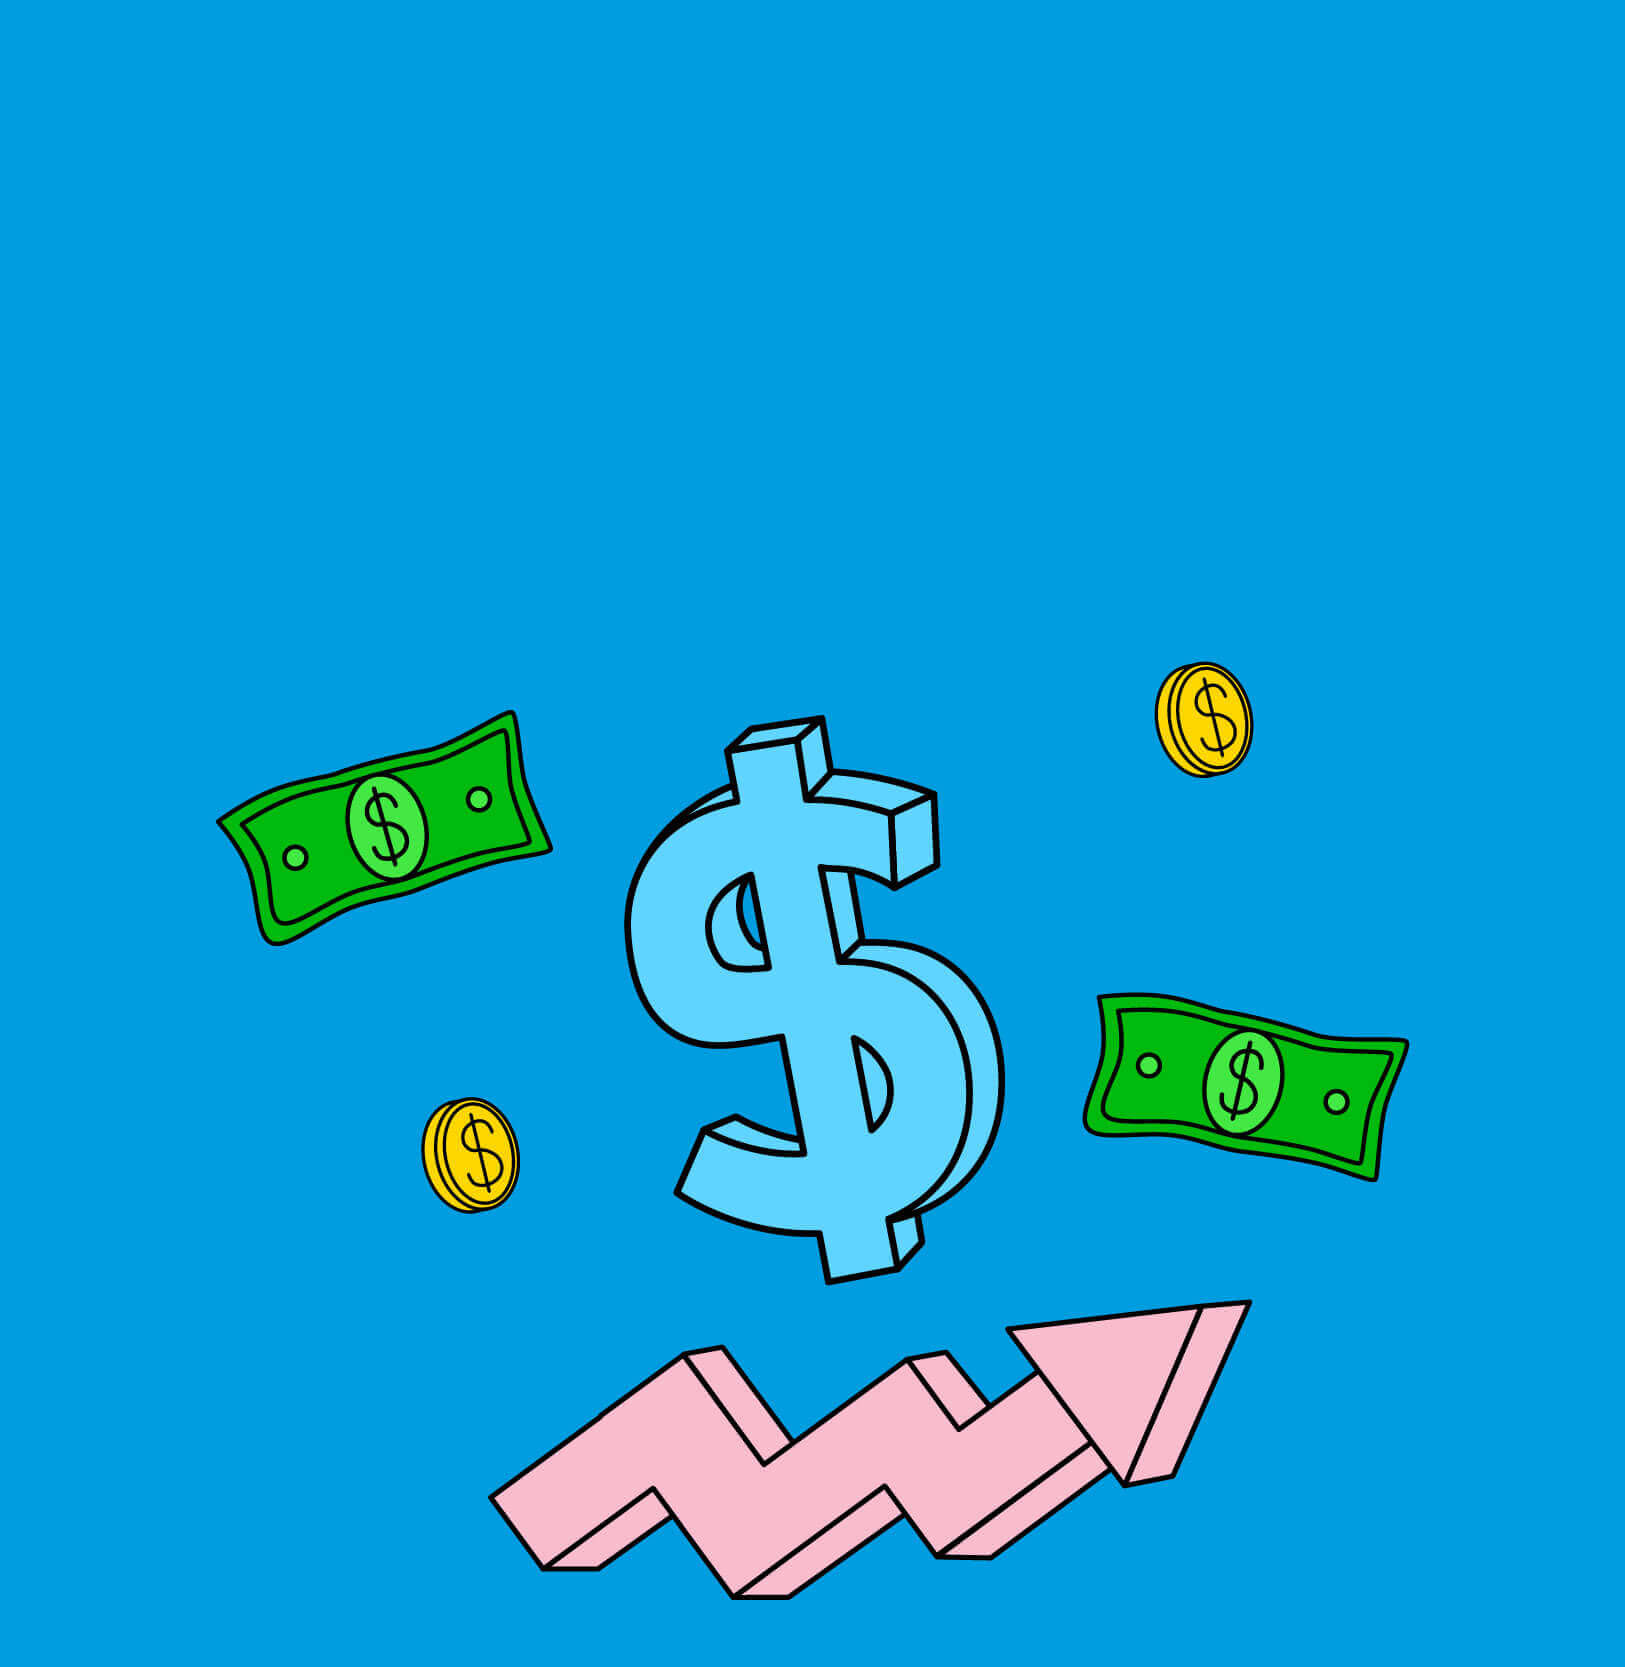 Stylized graphic of a dollar sign, money, and a positively trending chart line.